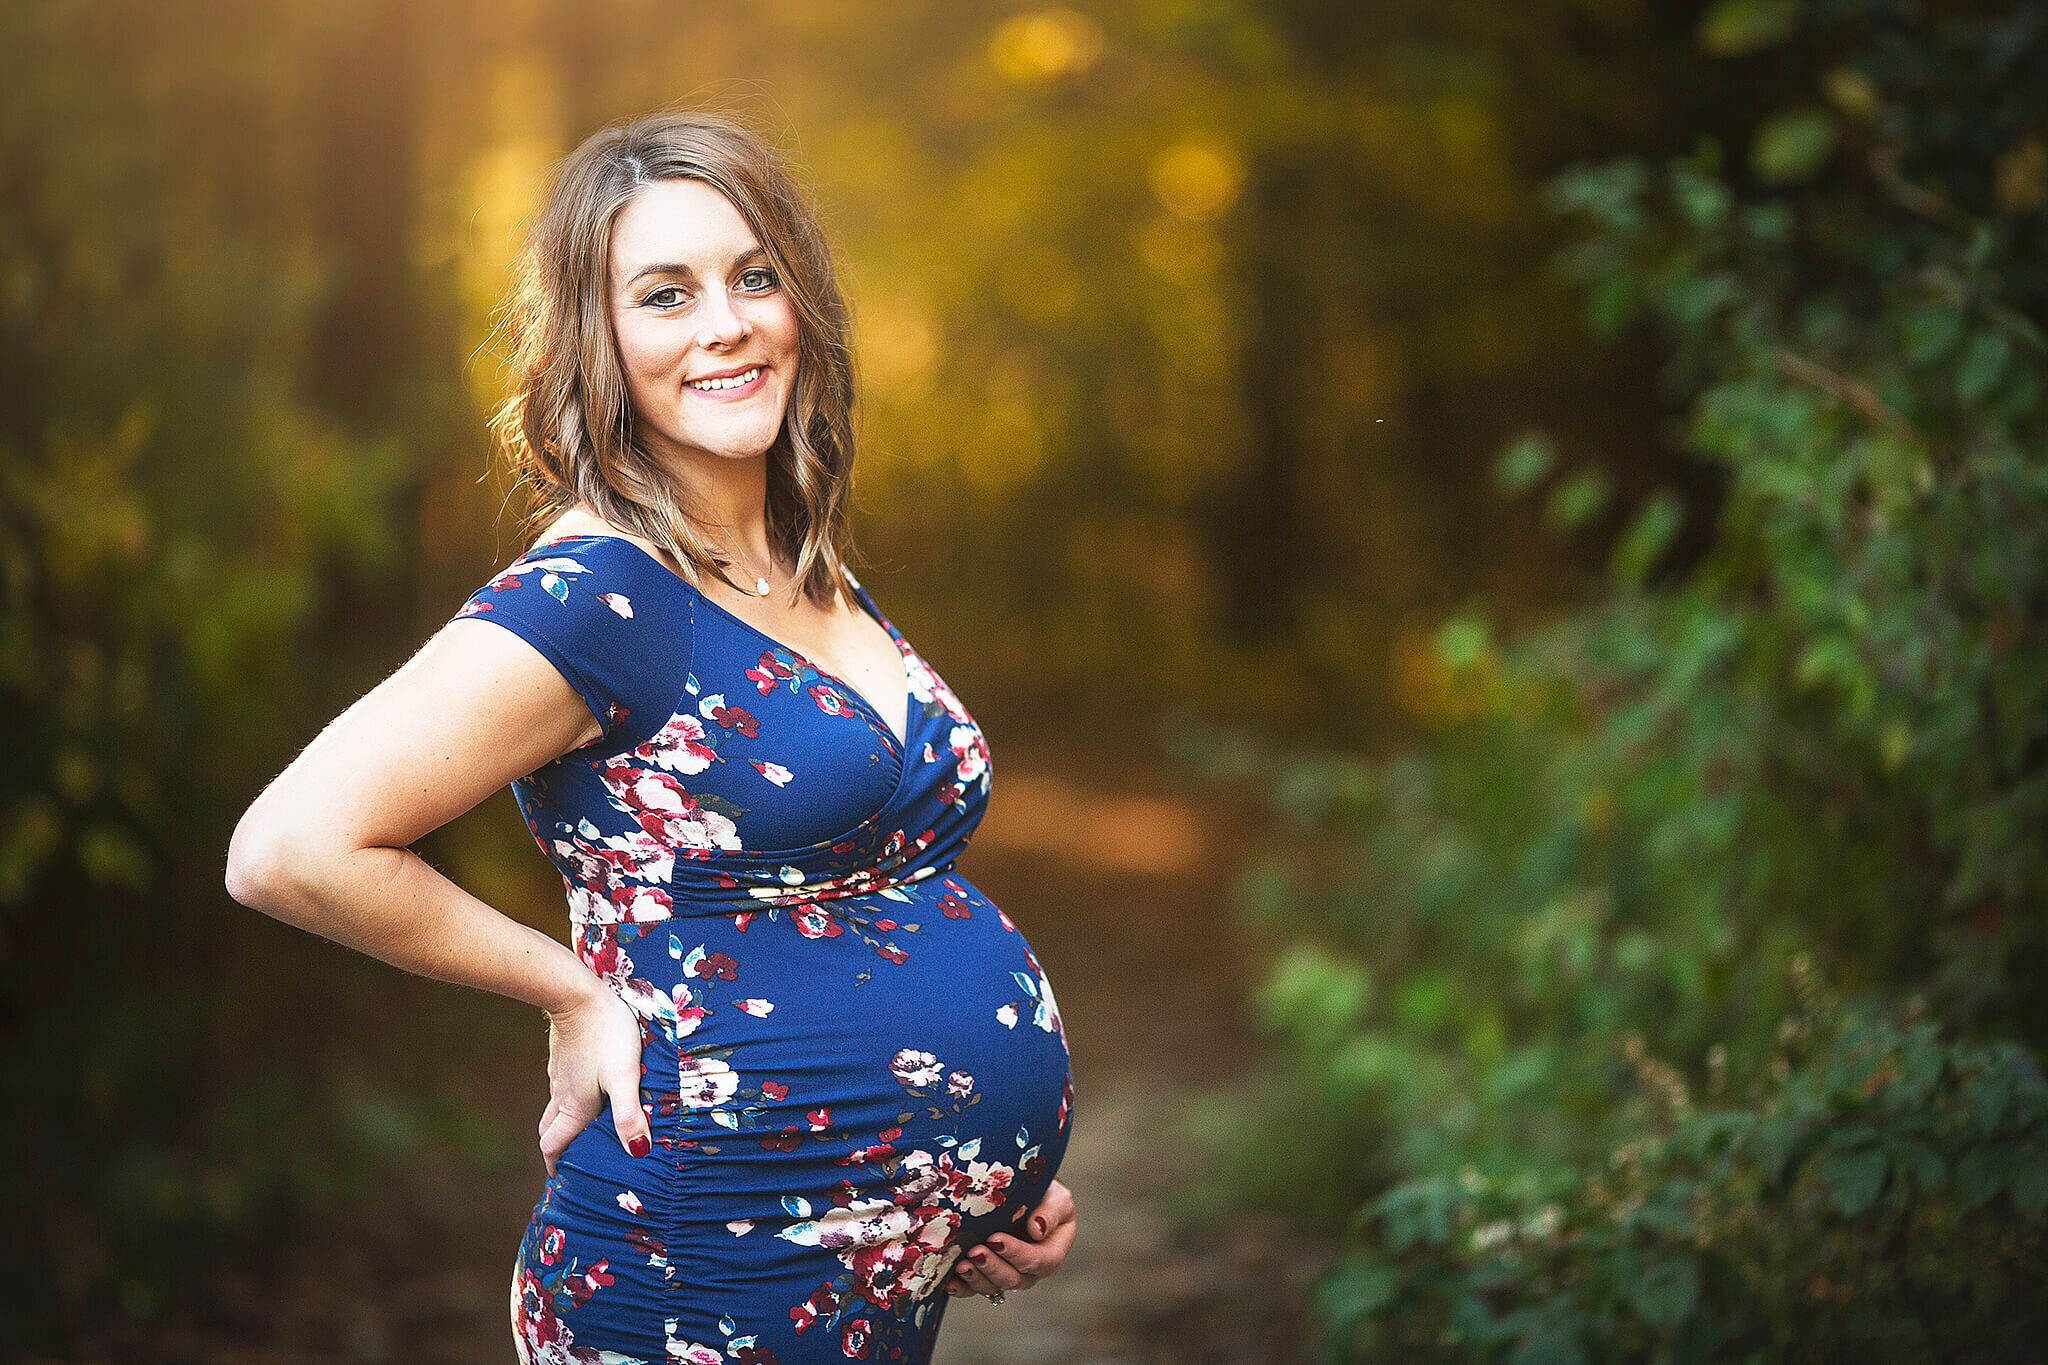 Pregnant women in blue dress with flowers on it, with one hands on her belly and one hand on her back, standing in front of a path in woods